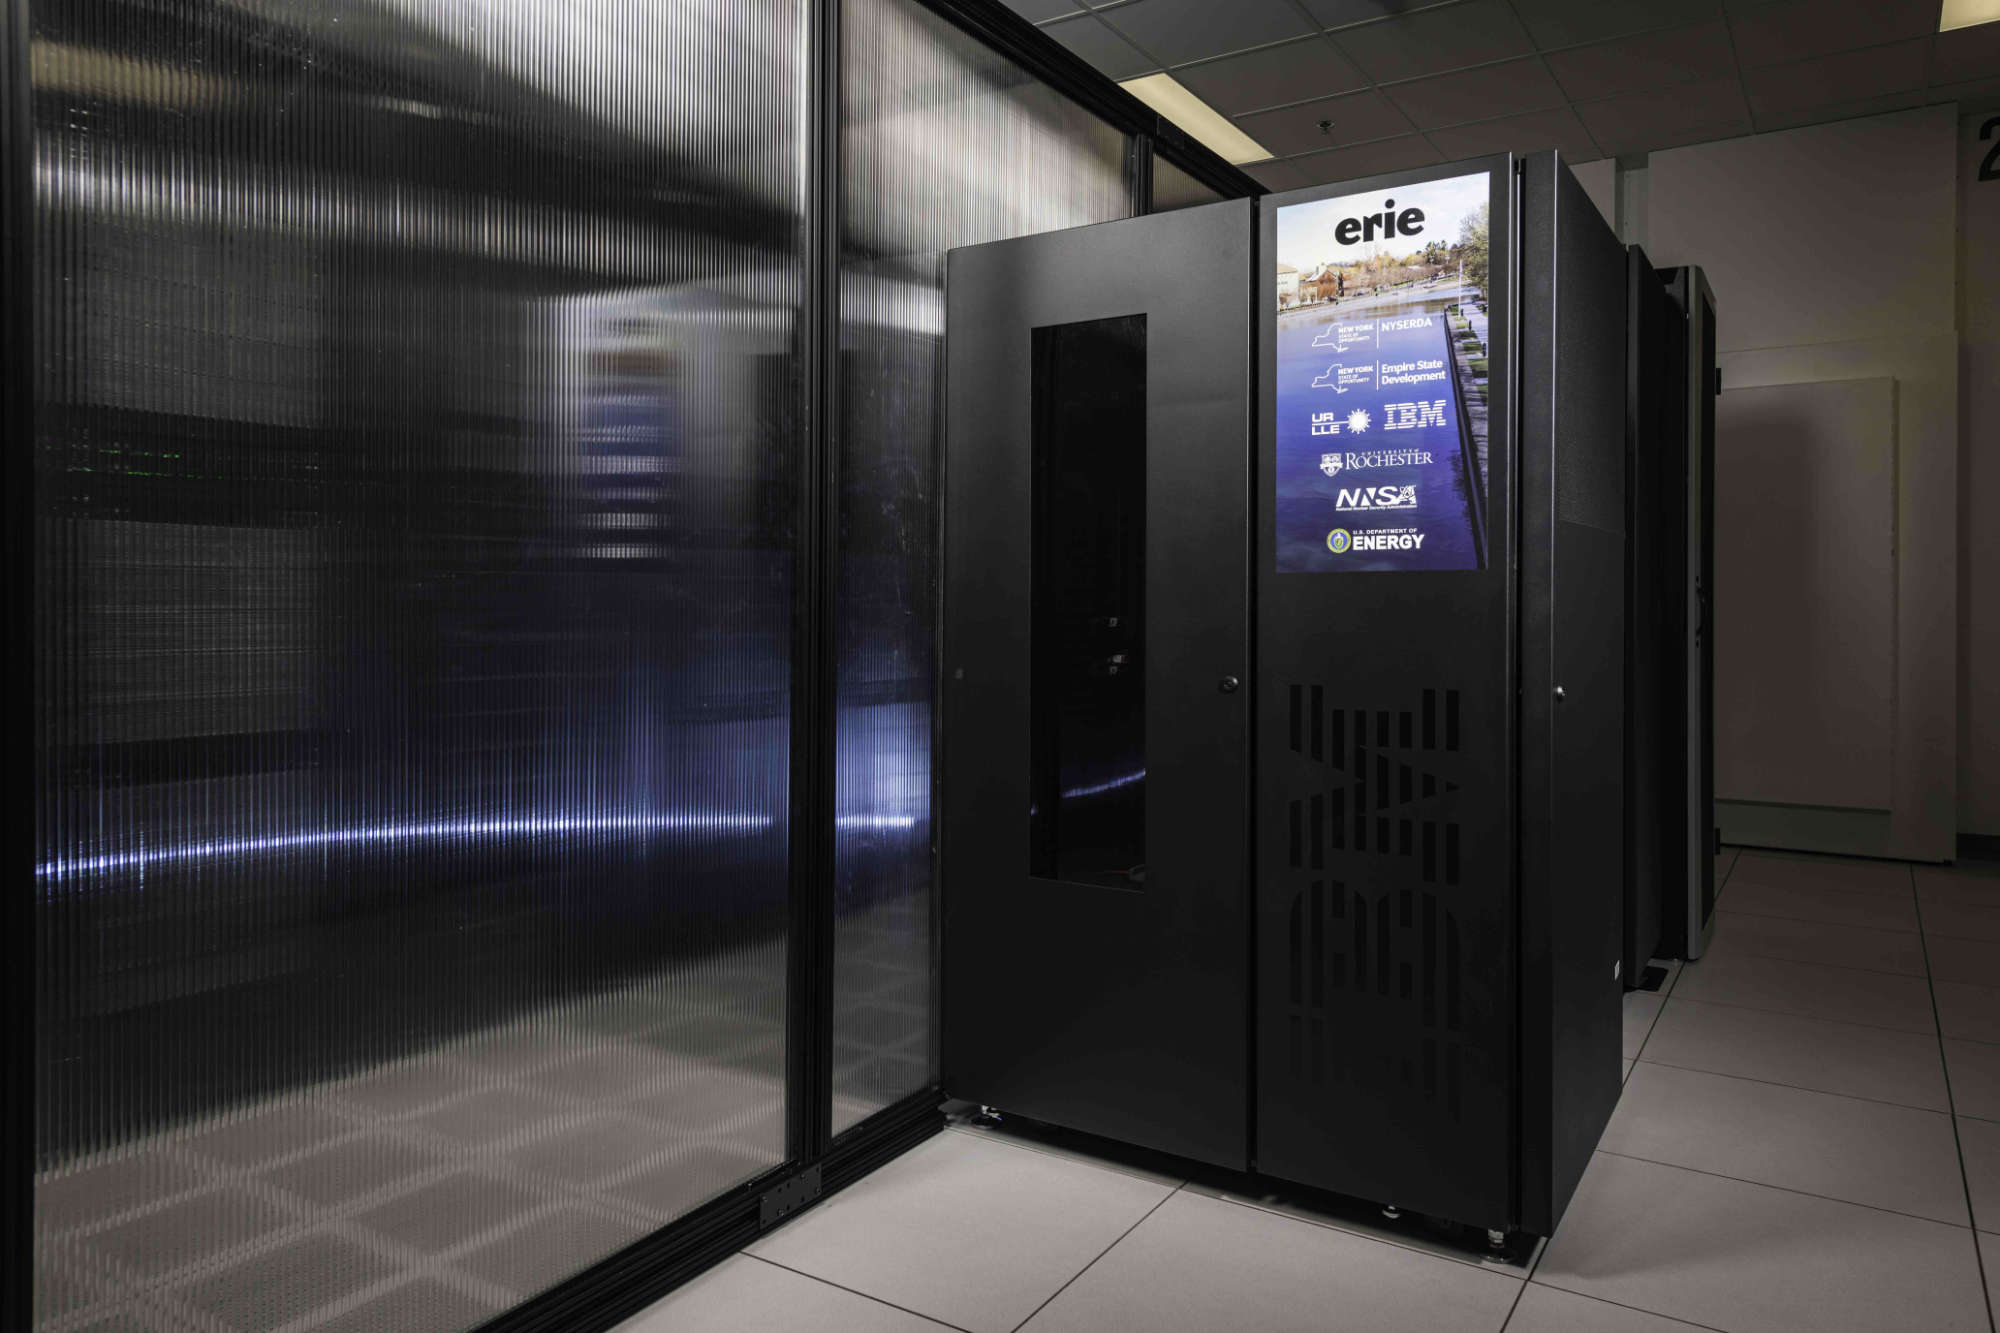 IBM-manufactured storage system for the Conesus supercomputer with a decal affixed to it that says "Erie" and displays state and federal logos. 